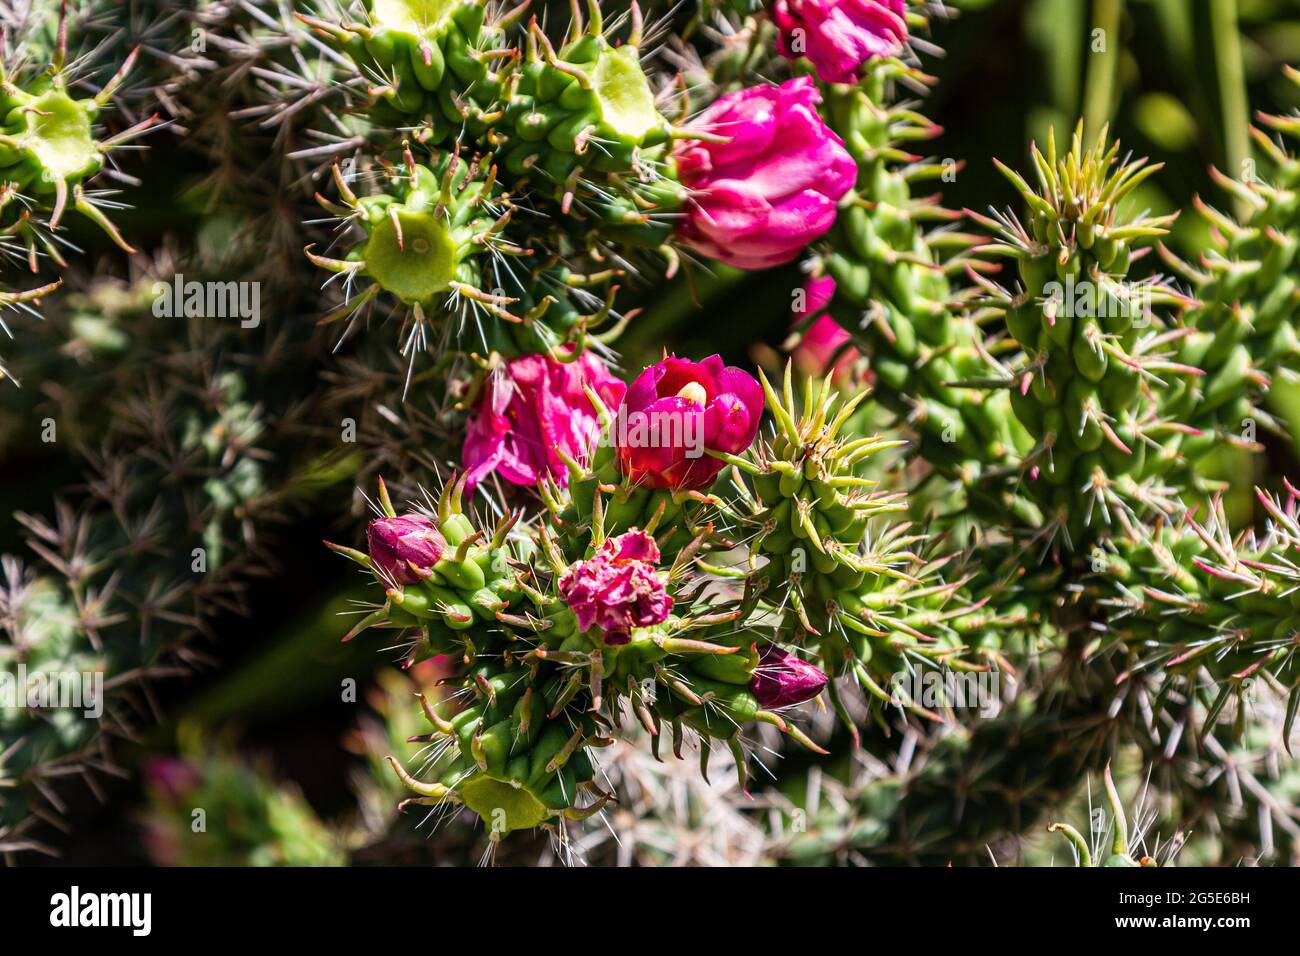 Blossoming cactus. A close-up of a flowering cactus. Cactus flowers. Stock Photo